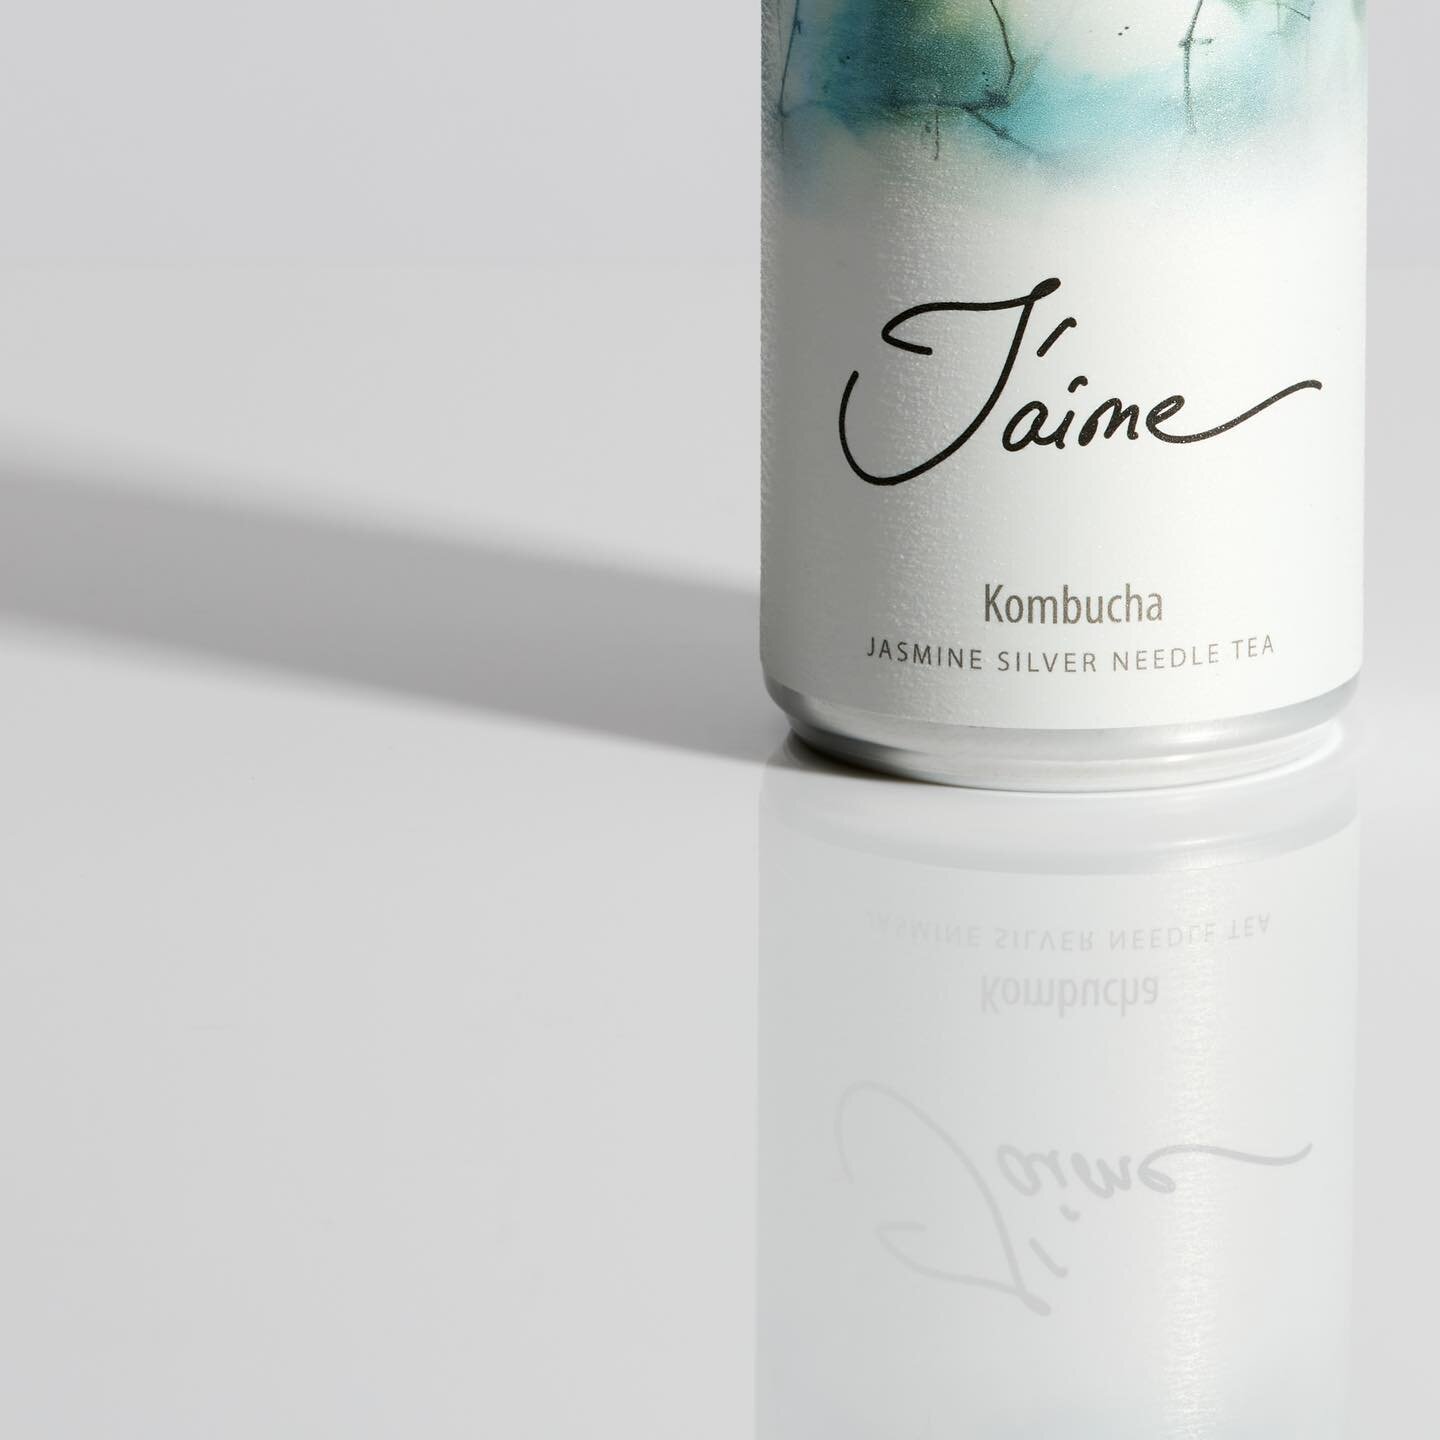 J&rsquo;aime Kombucha offers an aromatic flavour with delicate jasmine tea notes throughout.  #J&rsquo;aime 

#jaimekombucha #jaimemoment 

#kombucha #finetea #kombuchalover 

#jasminetea #nosugar #sparkling 

#wellbeing #goodforthesoul #soberlife #k